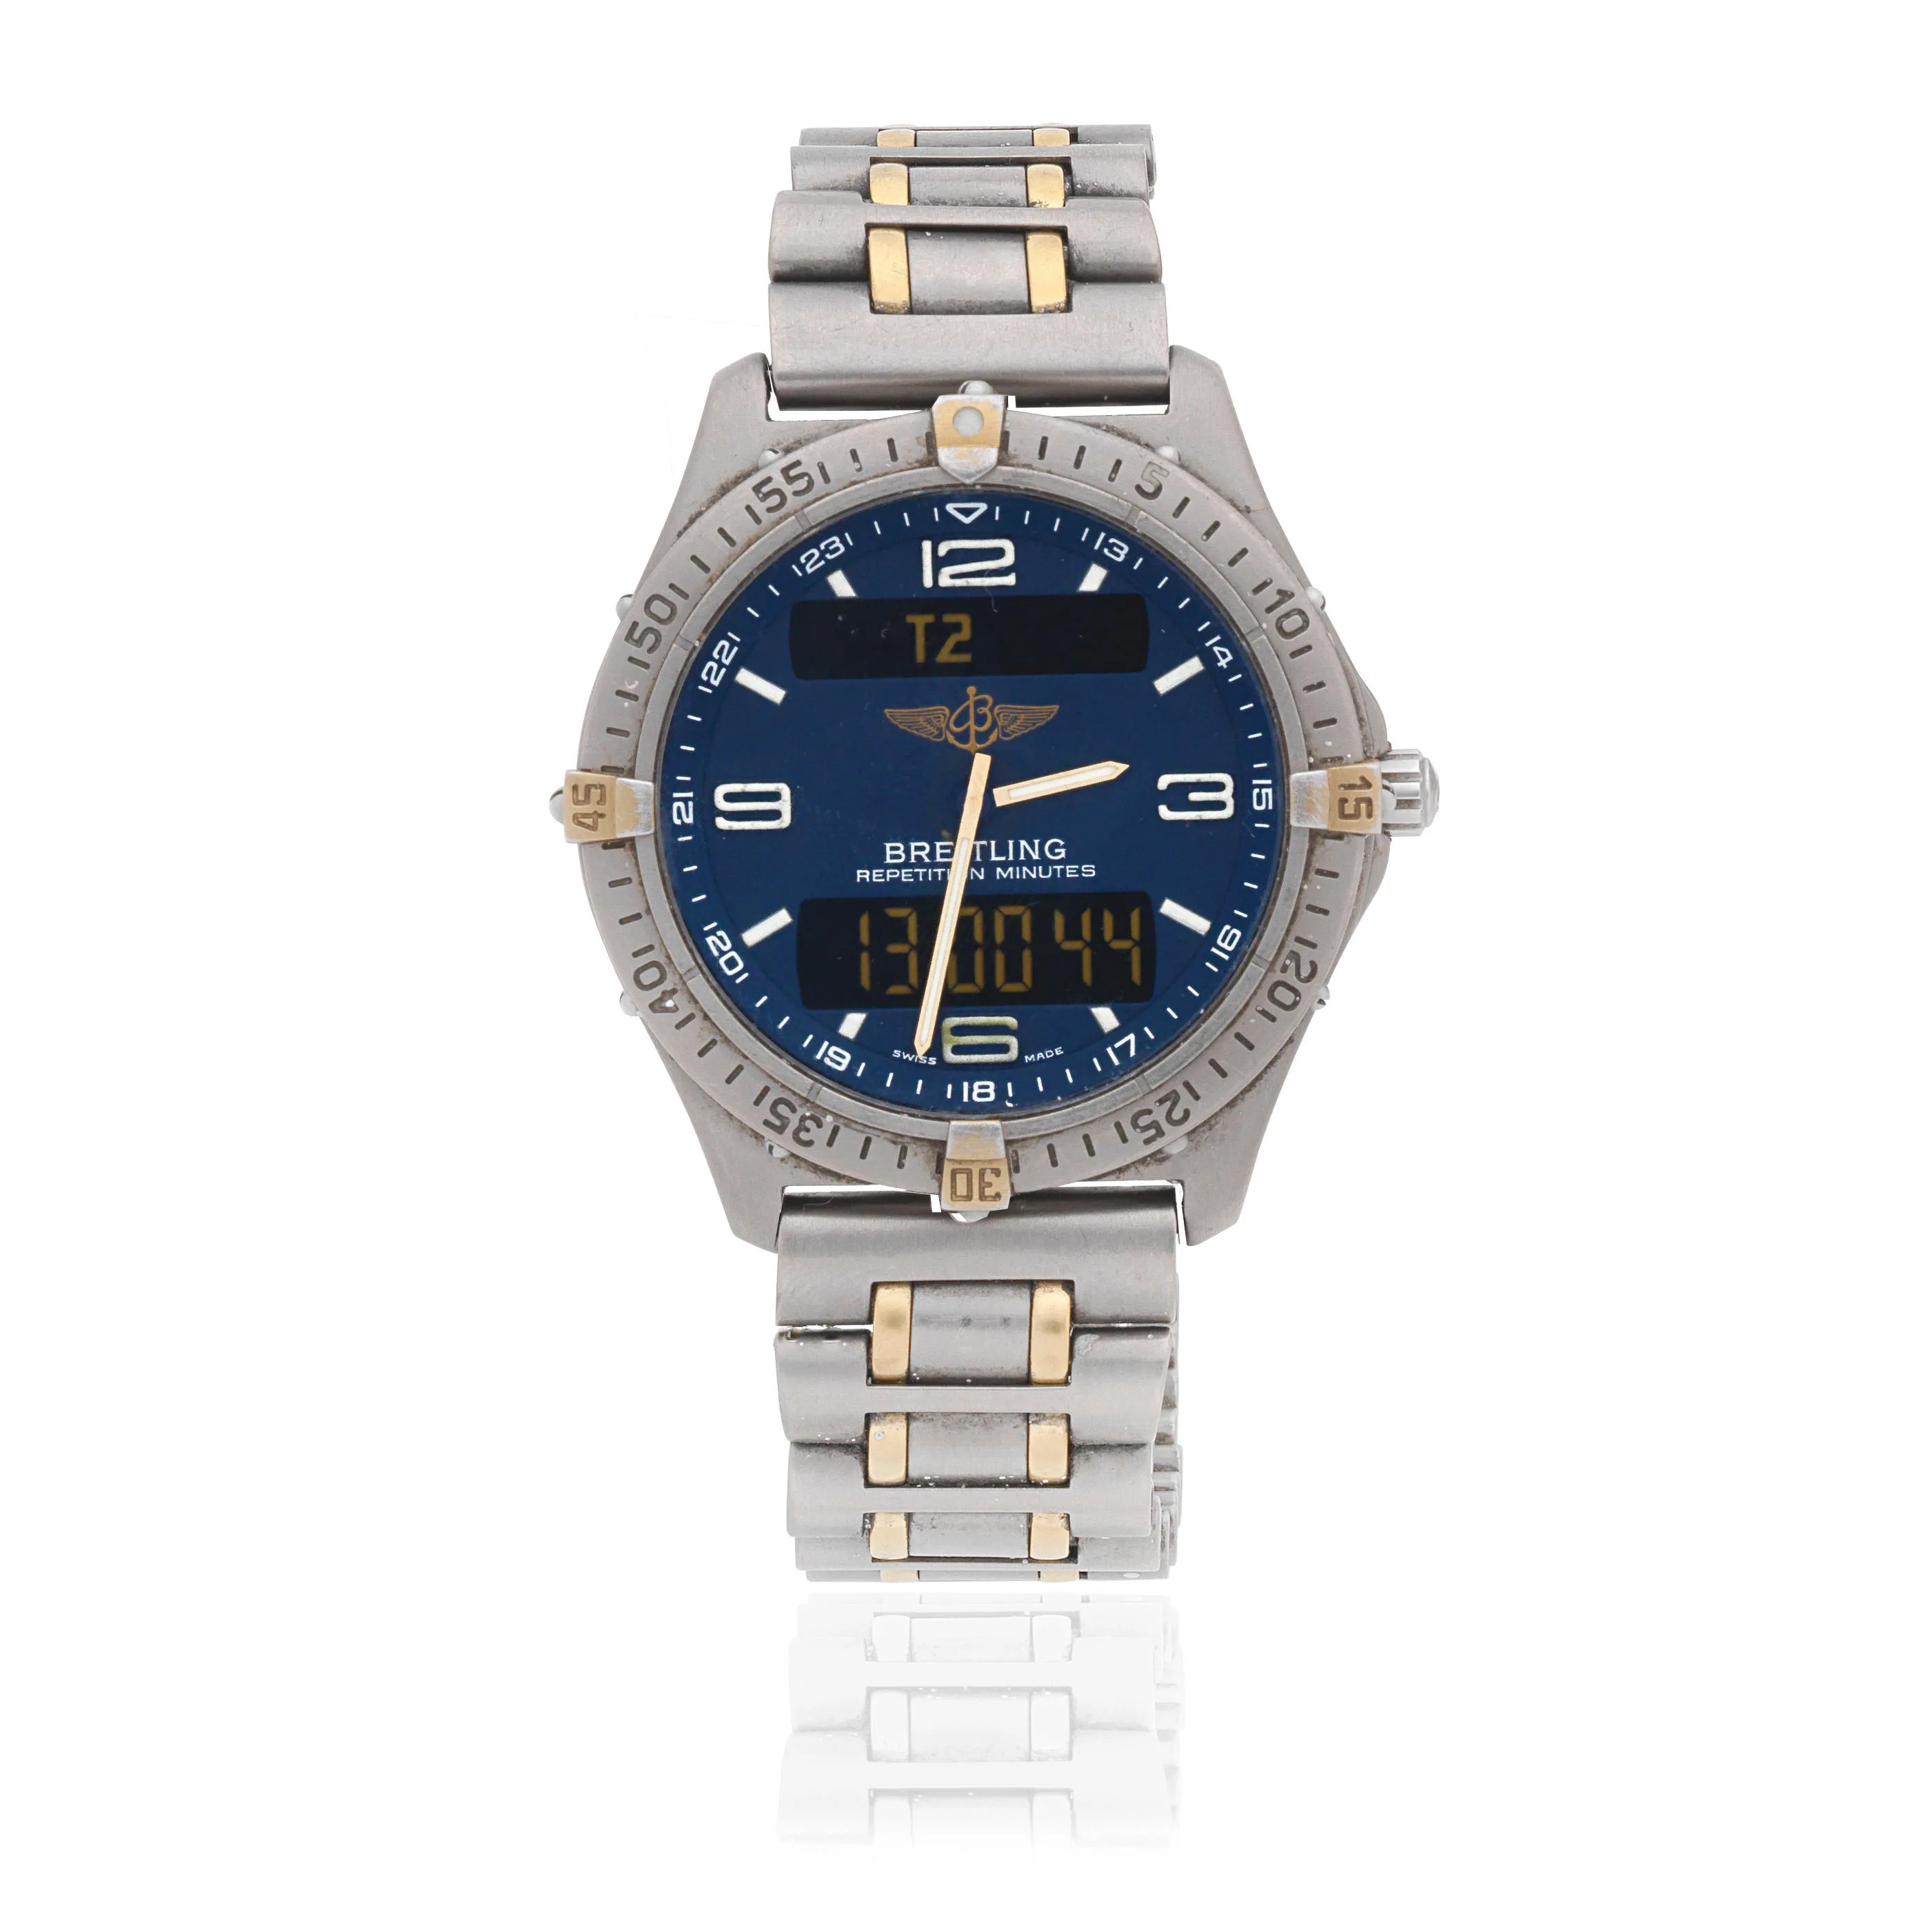 Breitling Aerospace F65062 40mm Yellow gold and titanium Blue